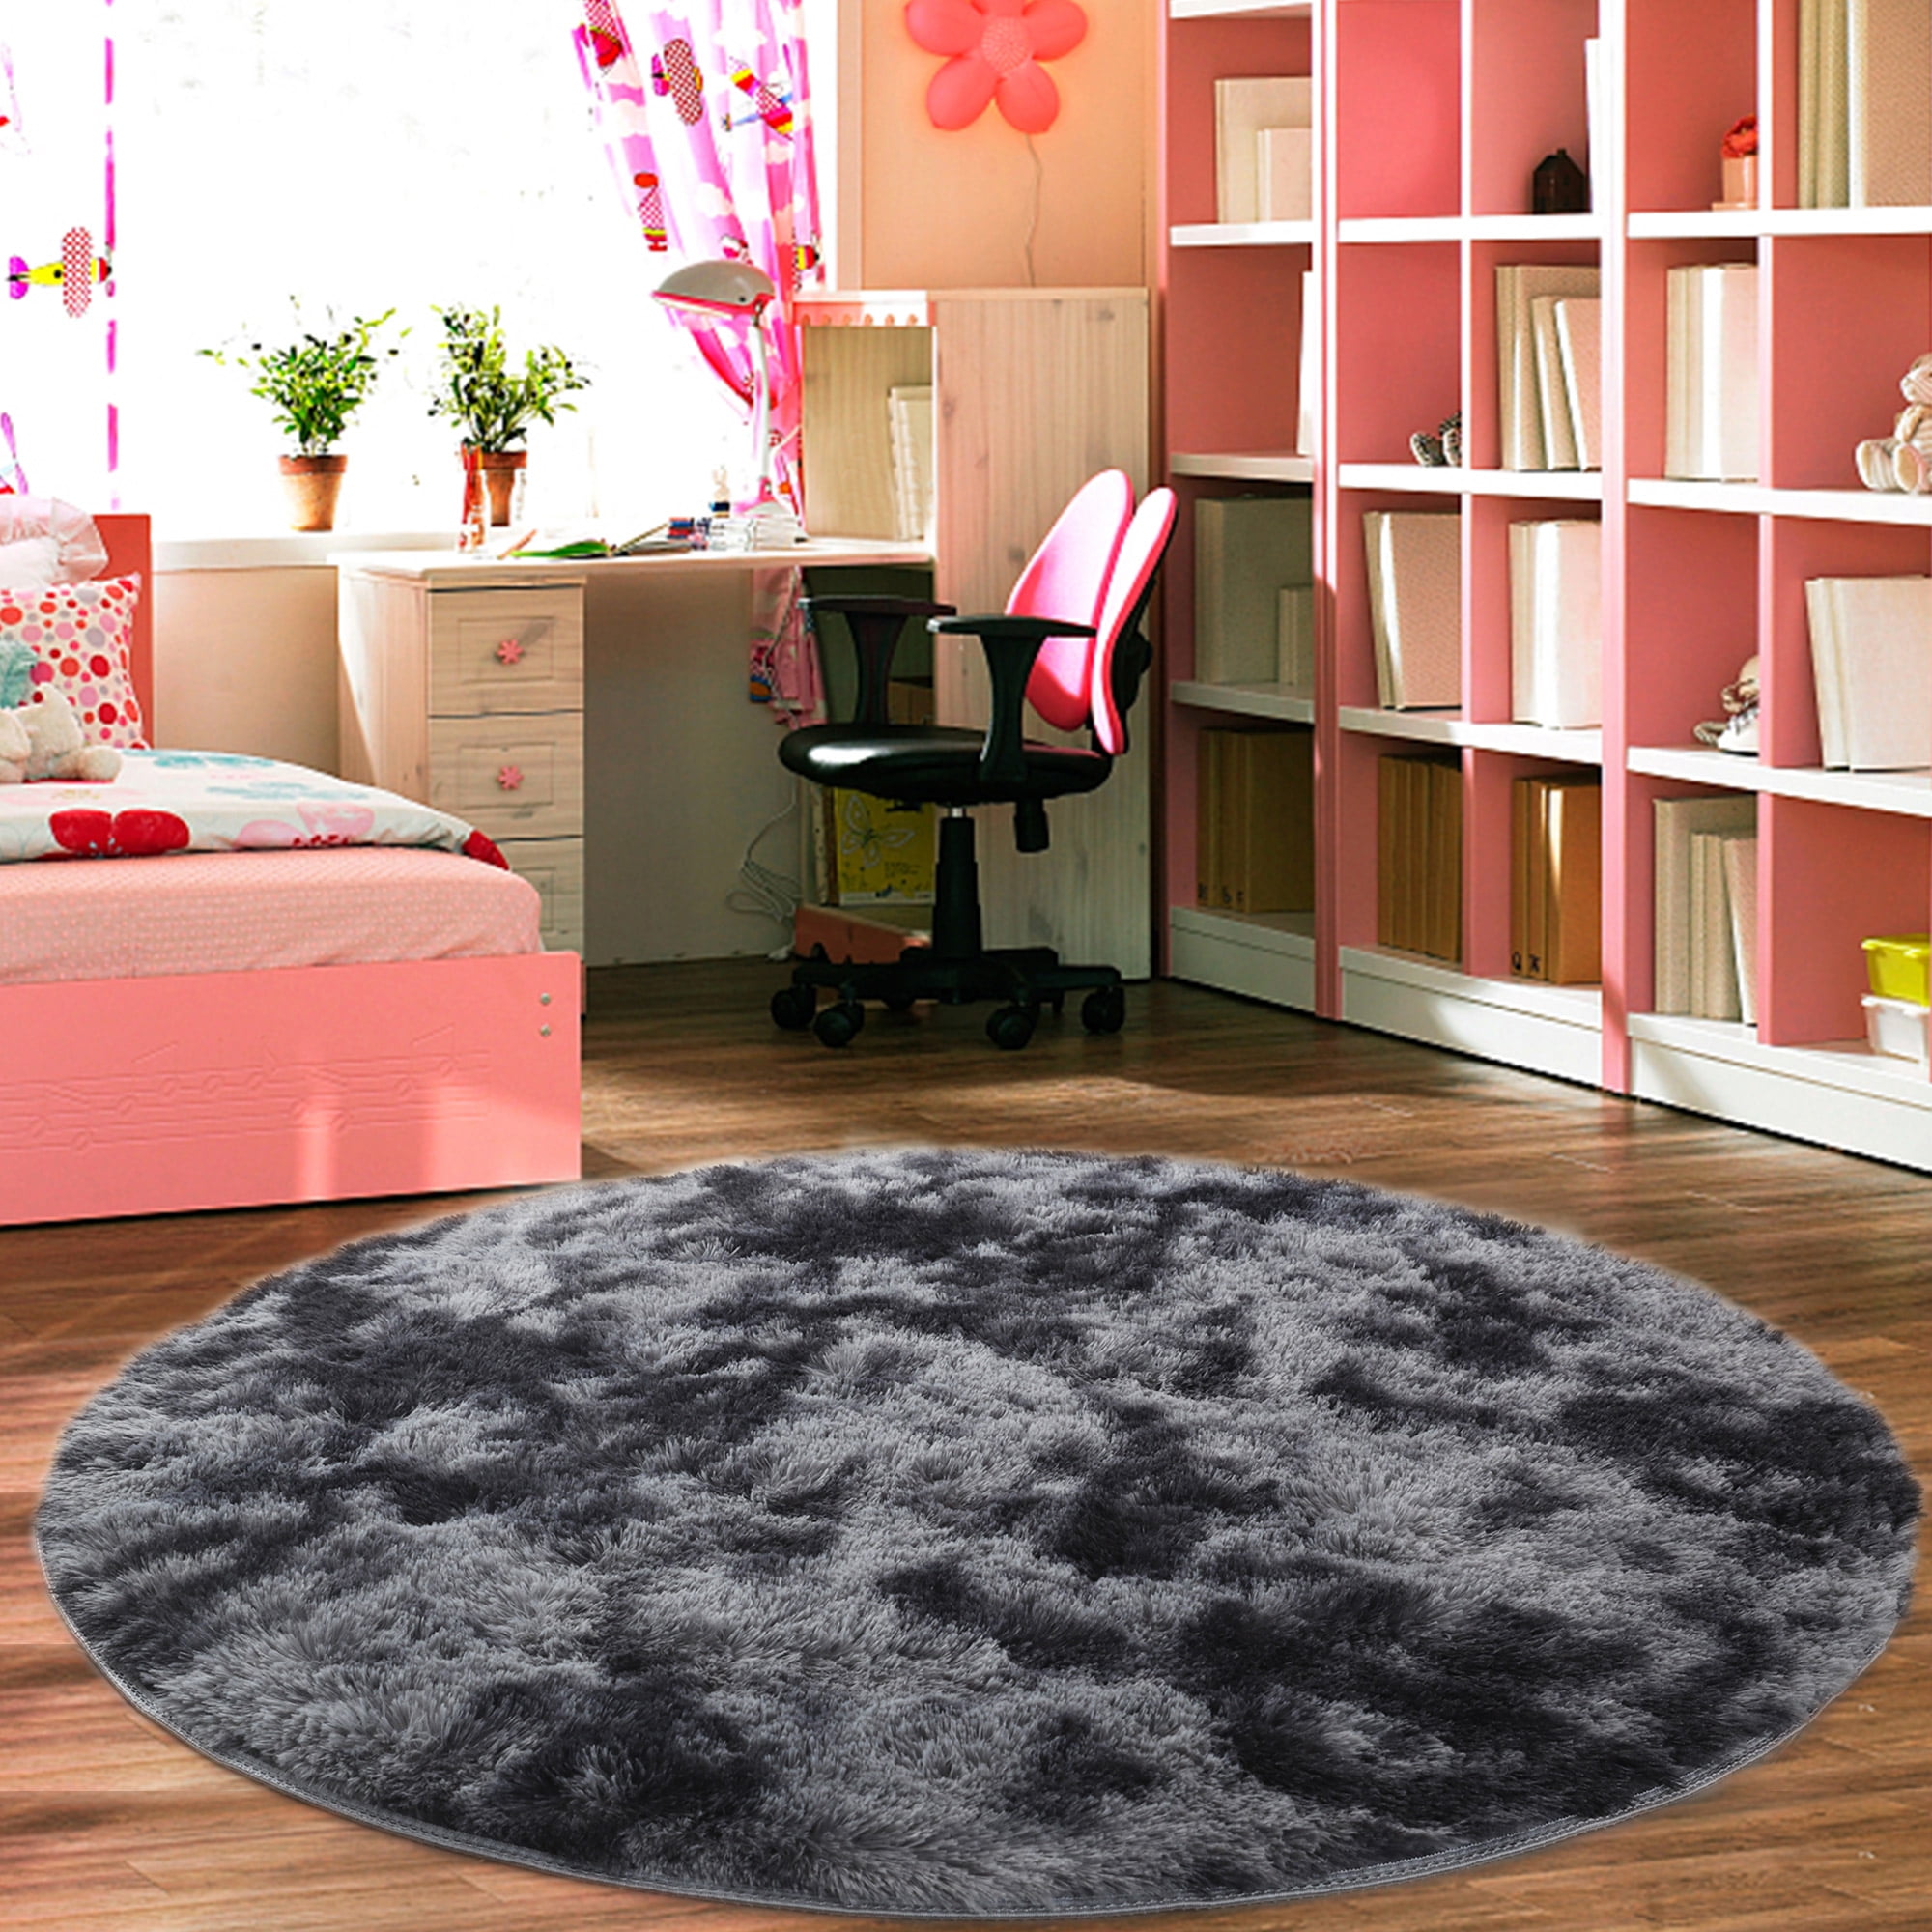 Youloveit Round Fluffy Soft Area Rugs For Kids Room Plush Gy Carpet Cute Circle Rug Boys Girls Bedroom Living Home Decor Circular 4x4ft 5 3x5 3ft 6x6ft Com